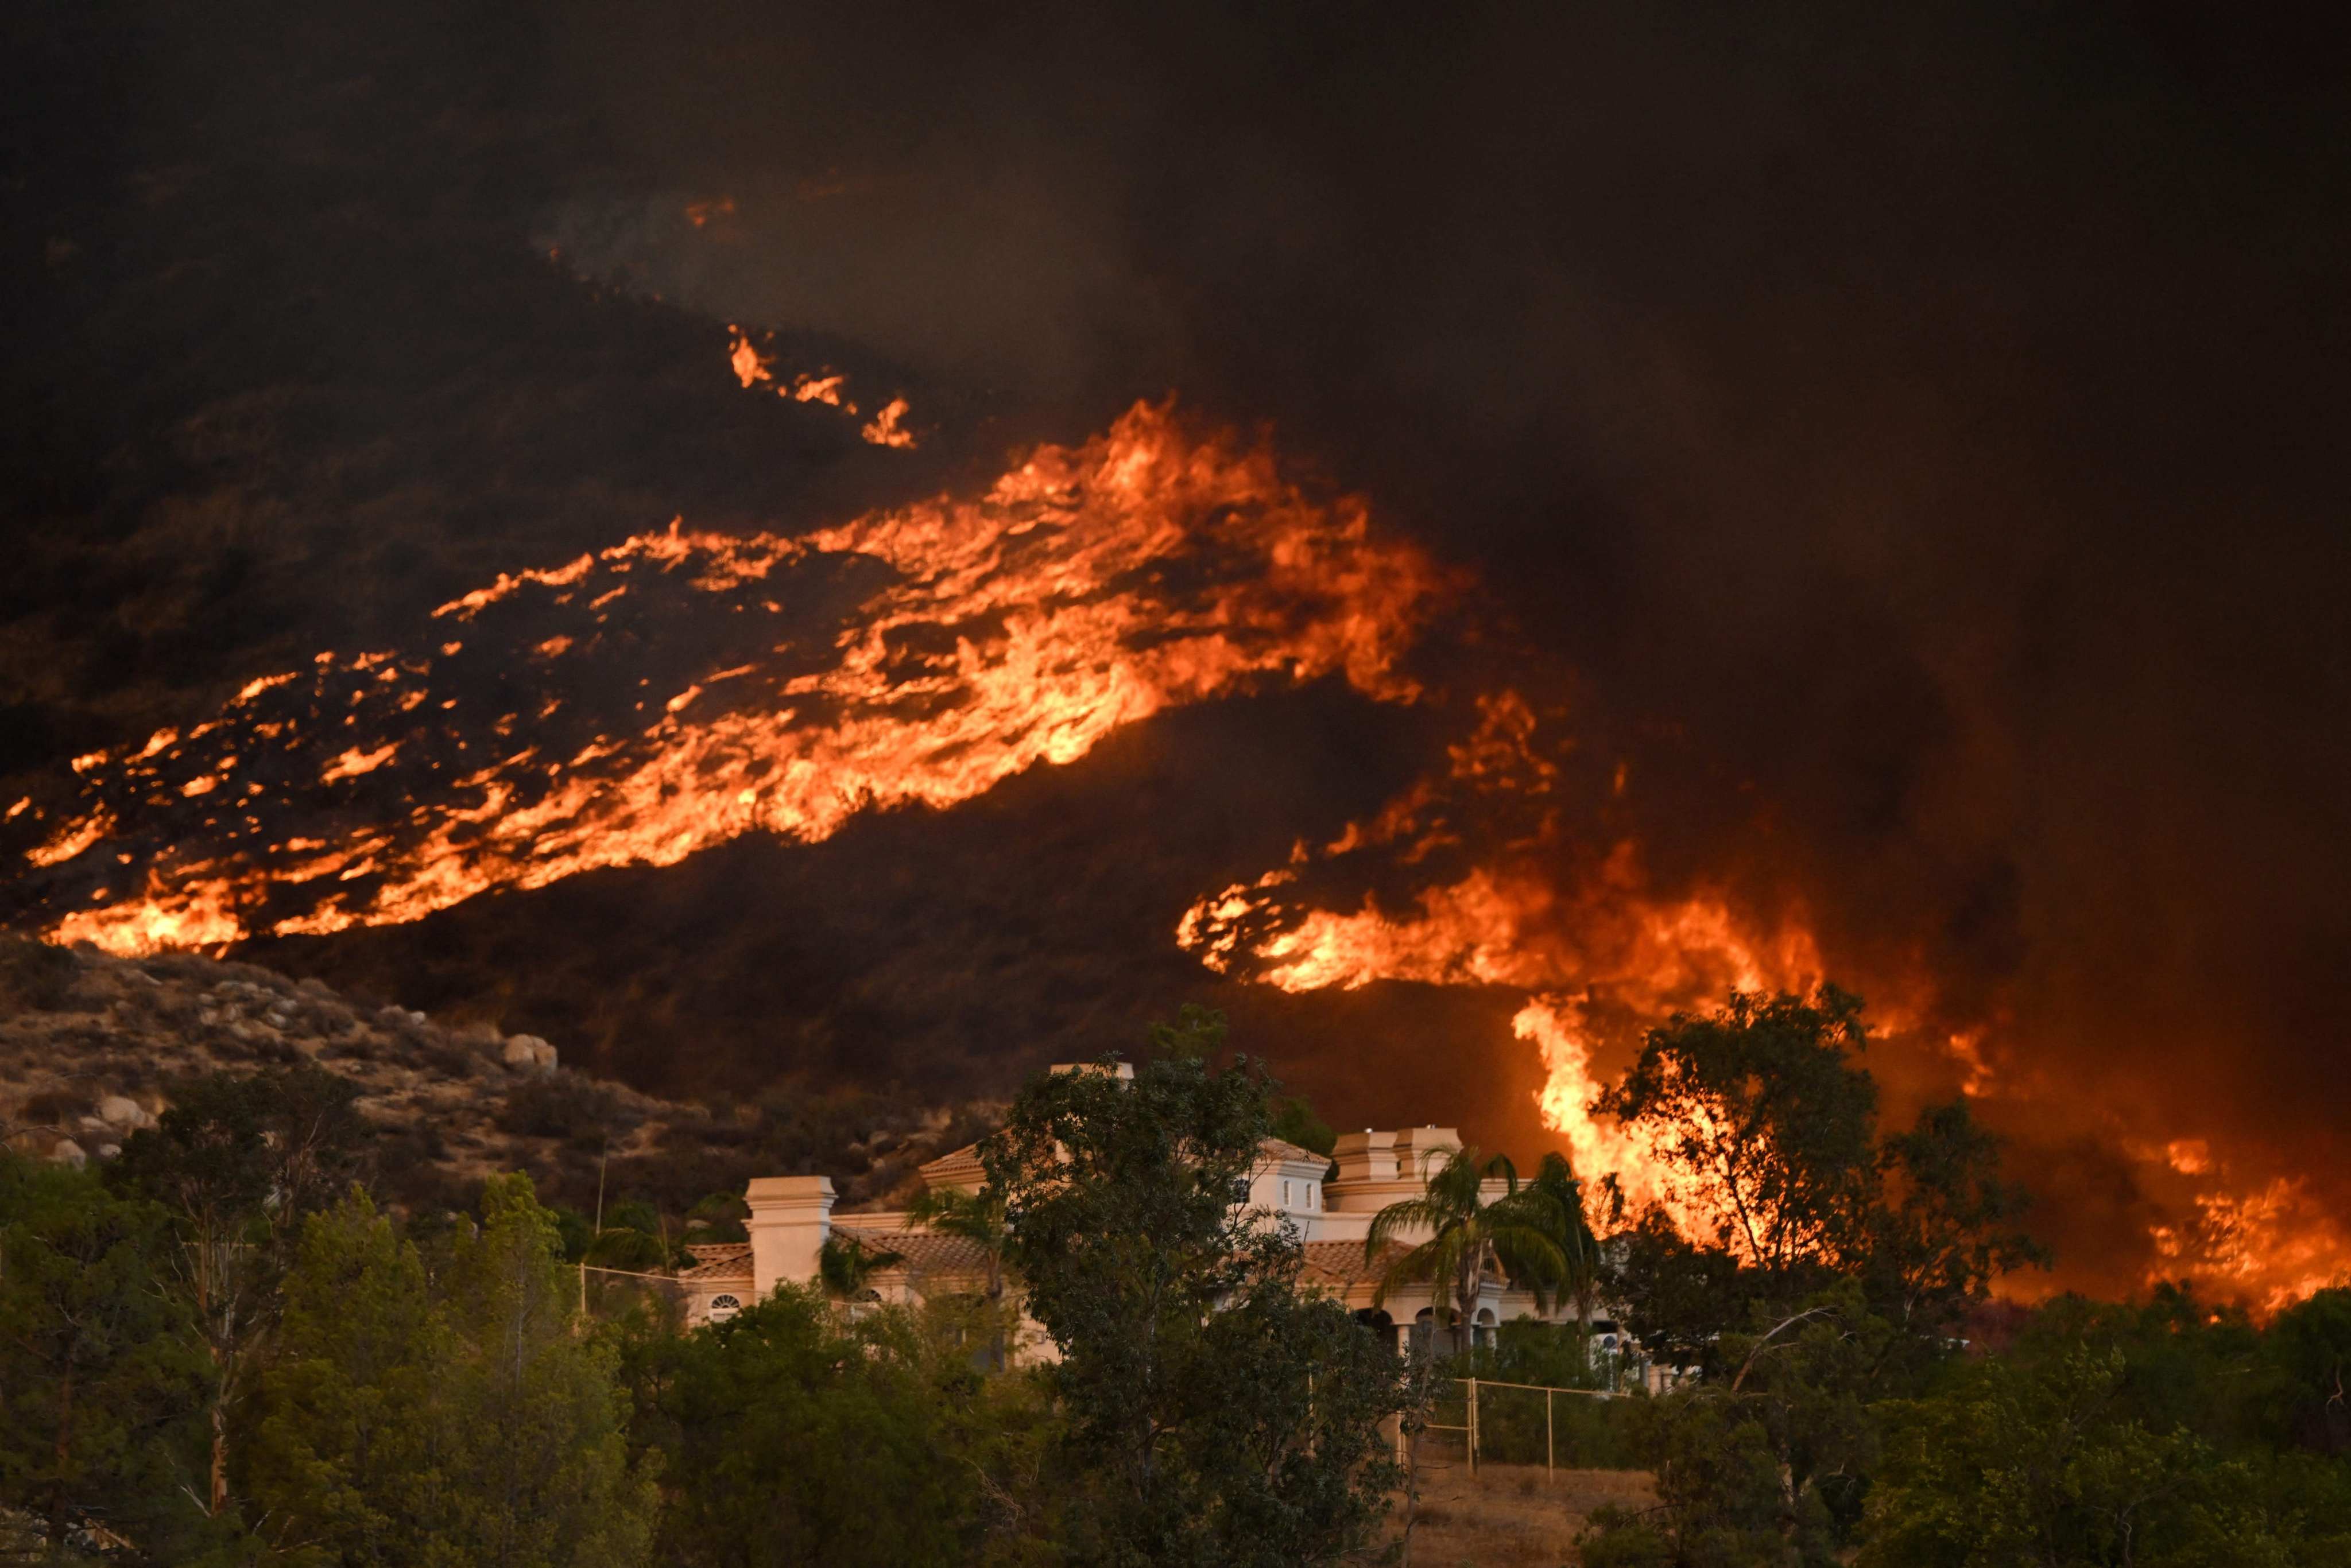 Plumes of smoke rise during a wildfire in California. Photo: AFP